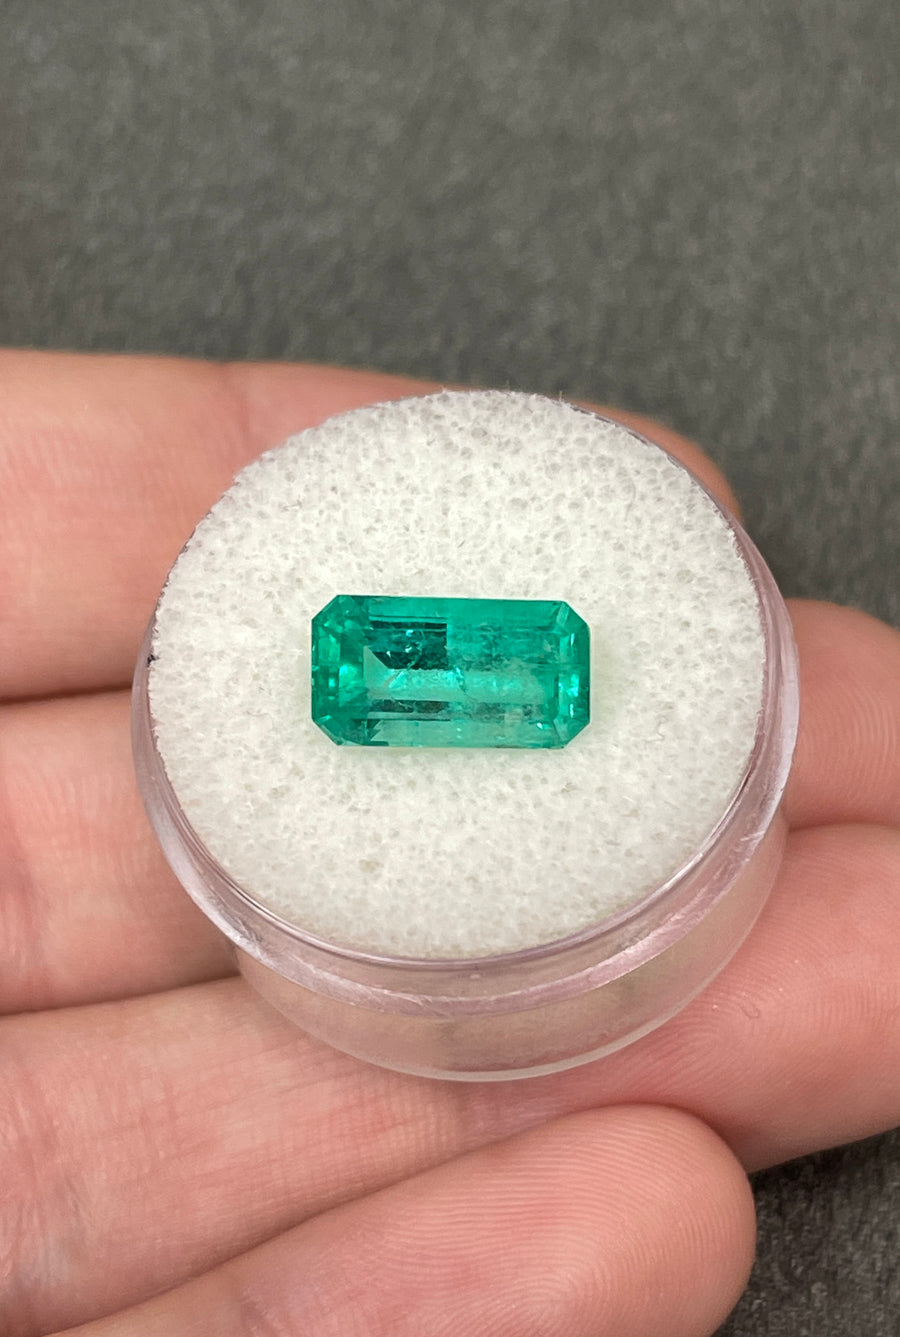 Elongated Emerald Cut - Genuine Colombian Emerald with a Bluish-Green Hue, 3.58 Carats